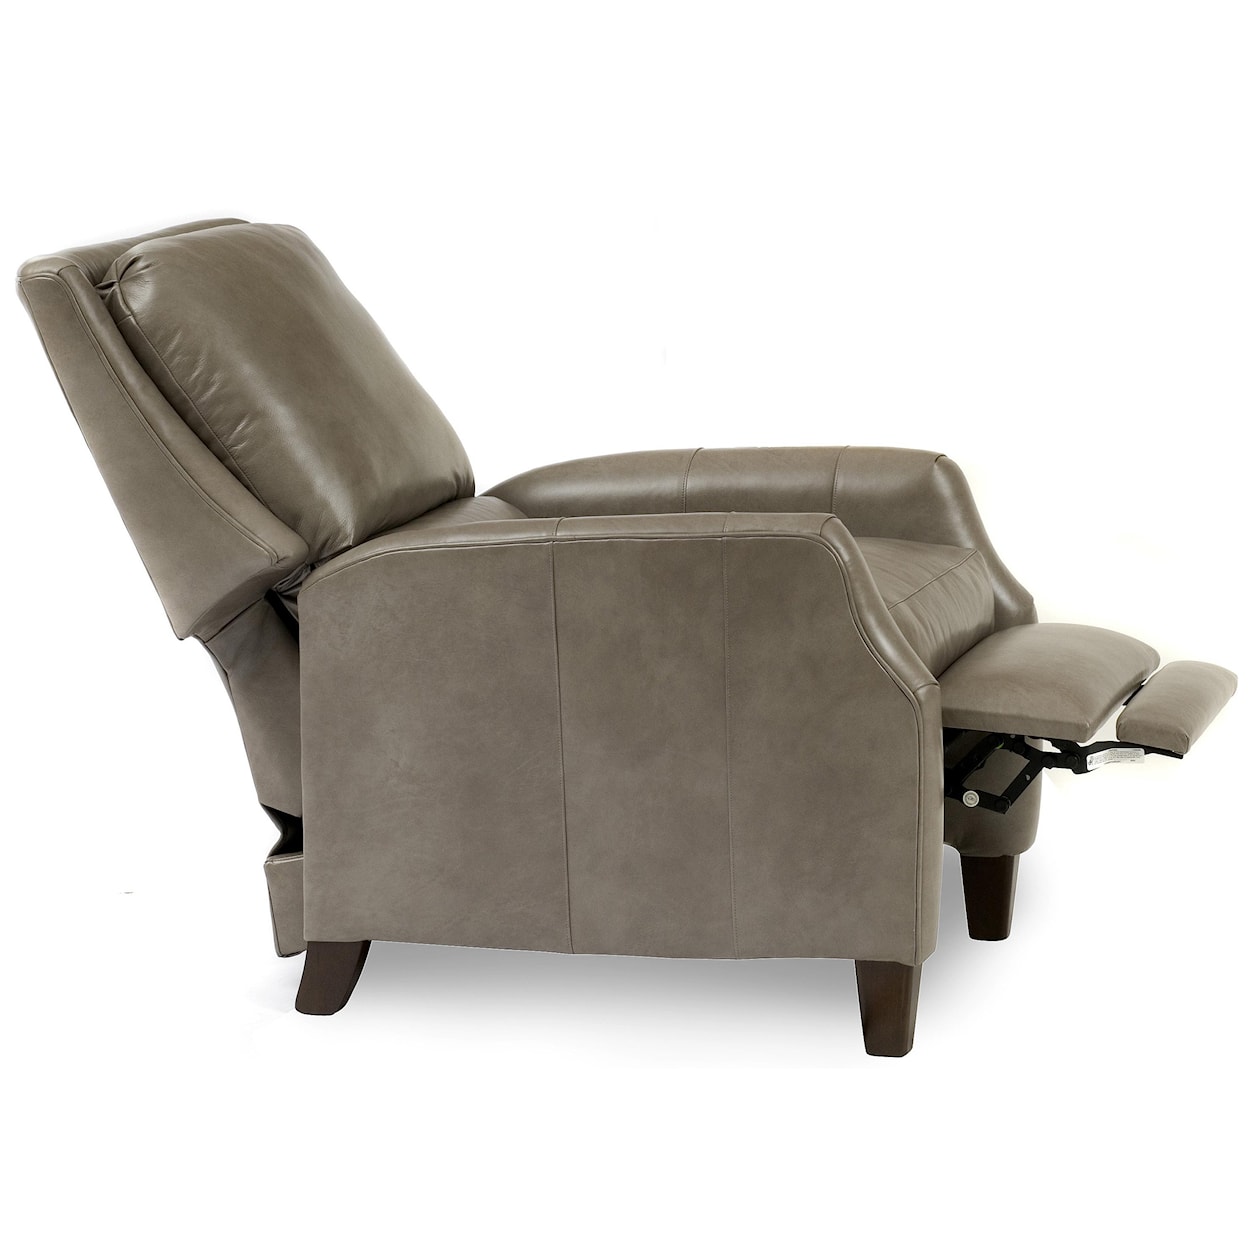 Smith Brothers Recliners  3 Way Recliner